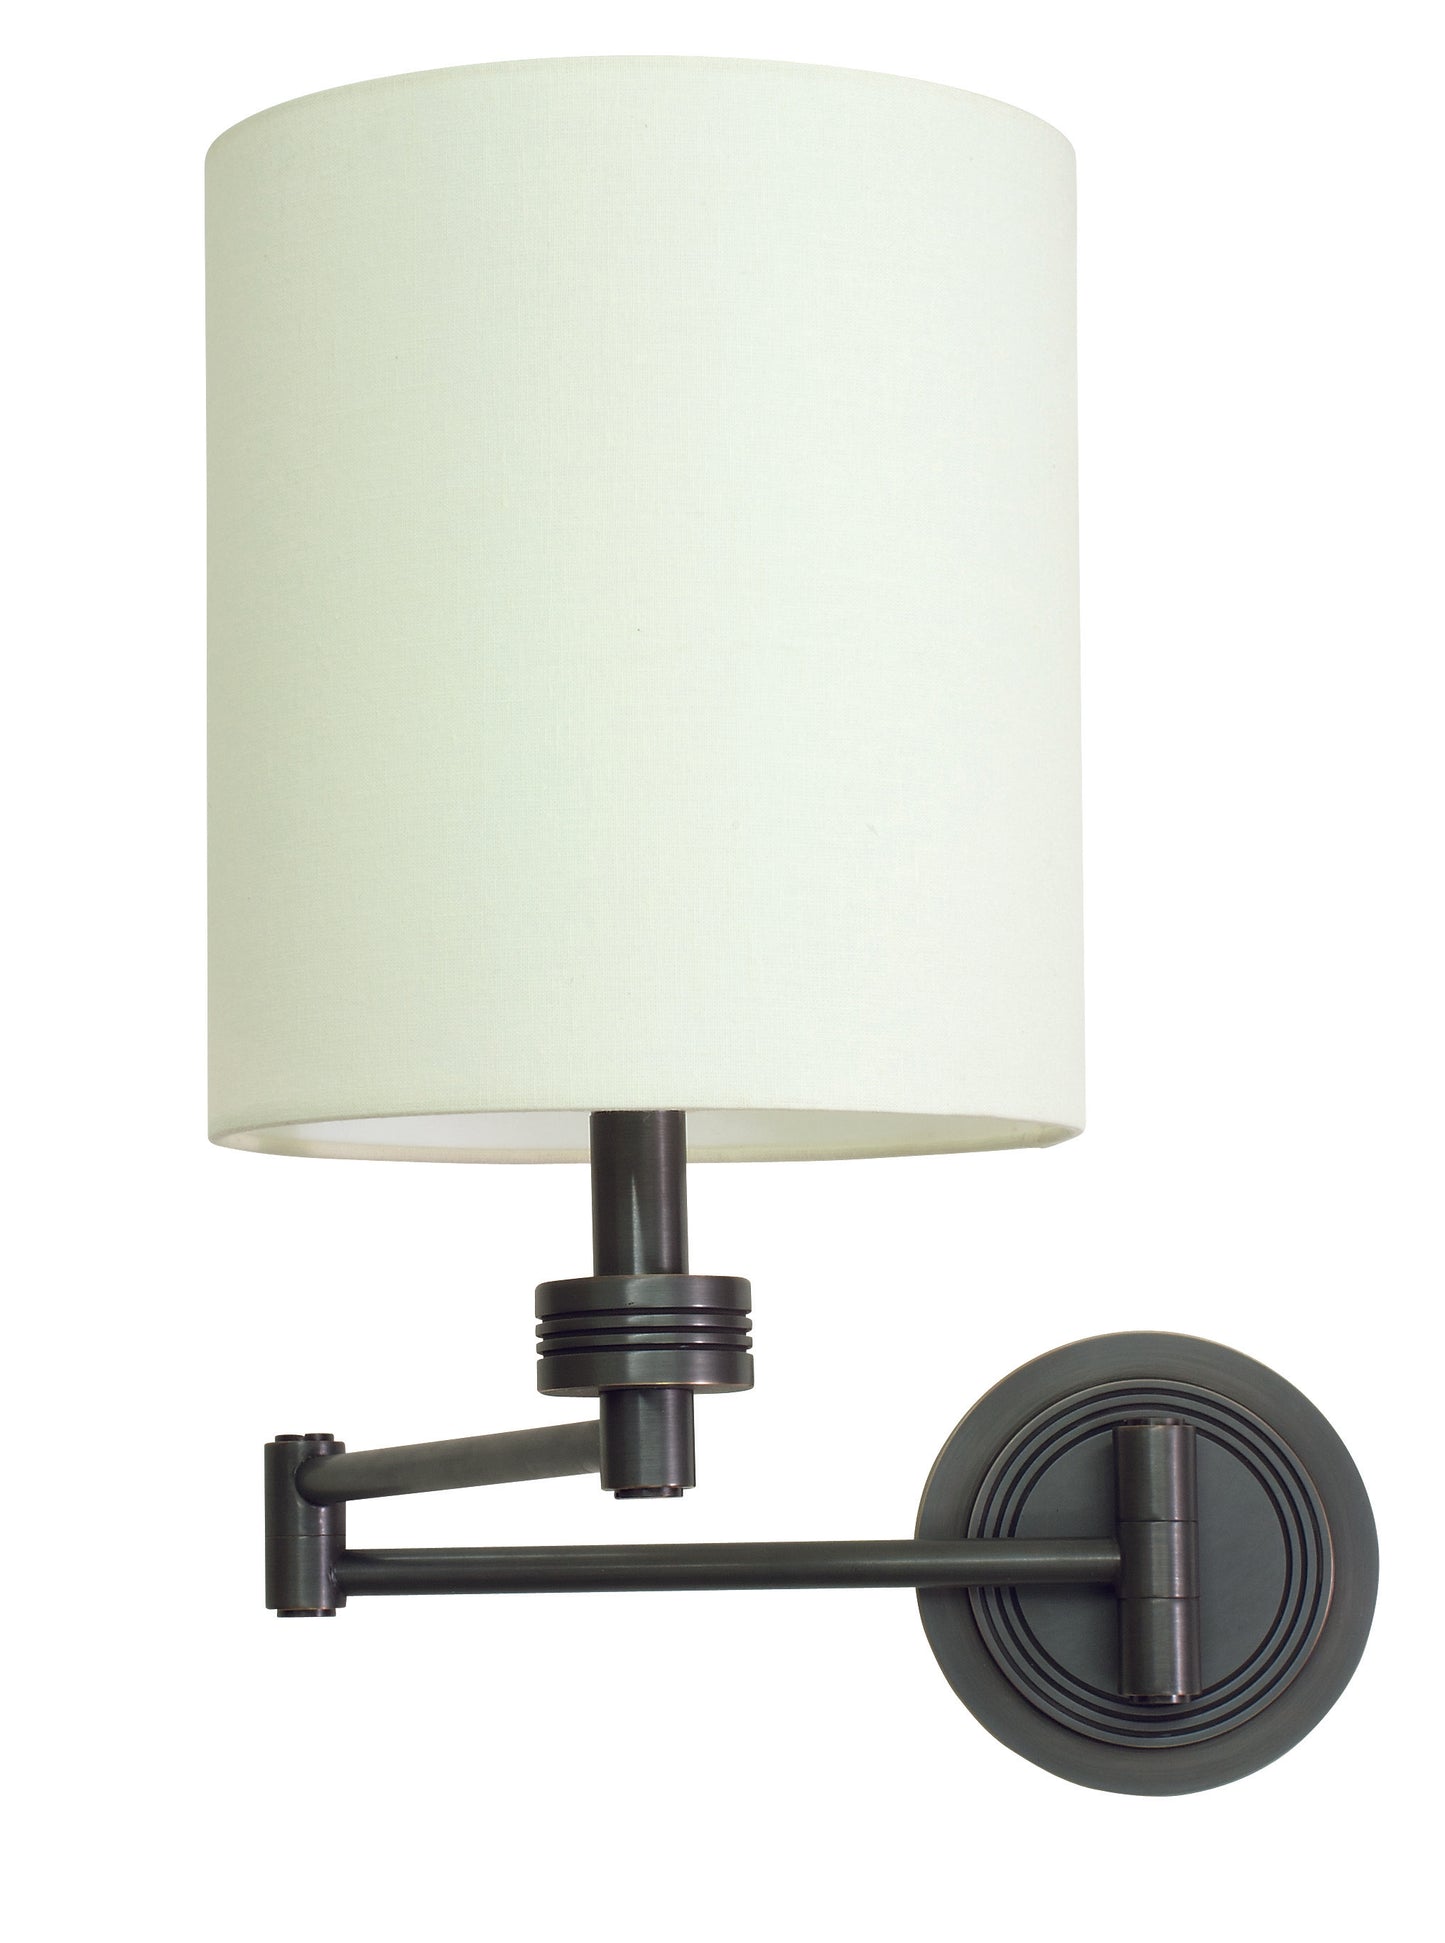 House of Troy Wall Swing Arm Lamp Oil Rubbed Bronze WS775-OB